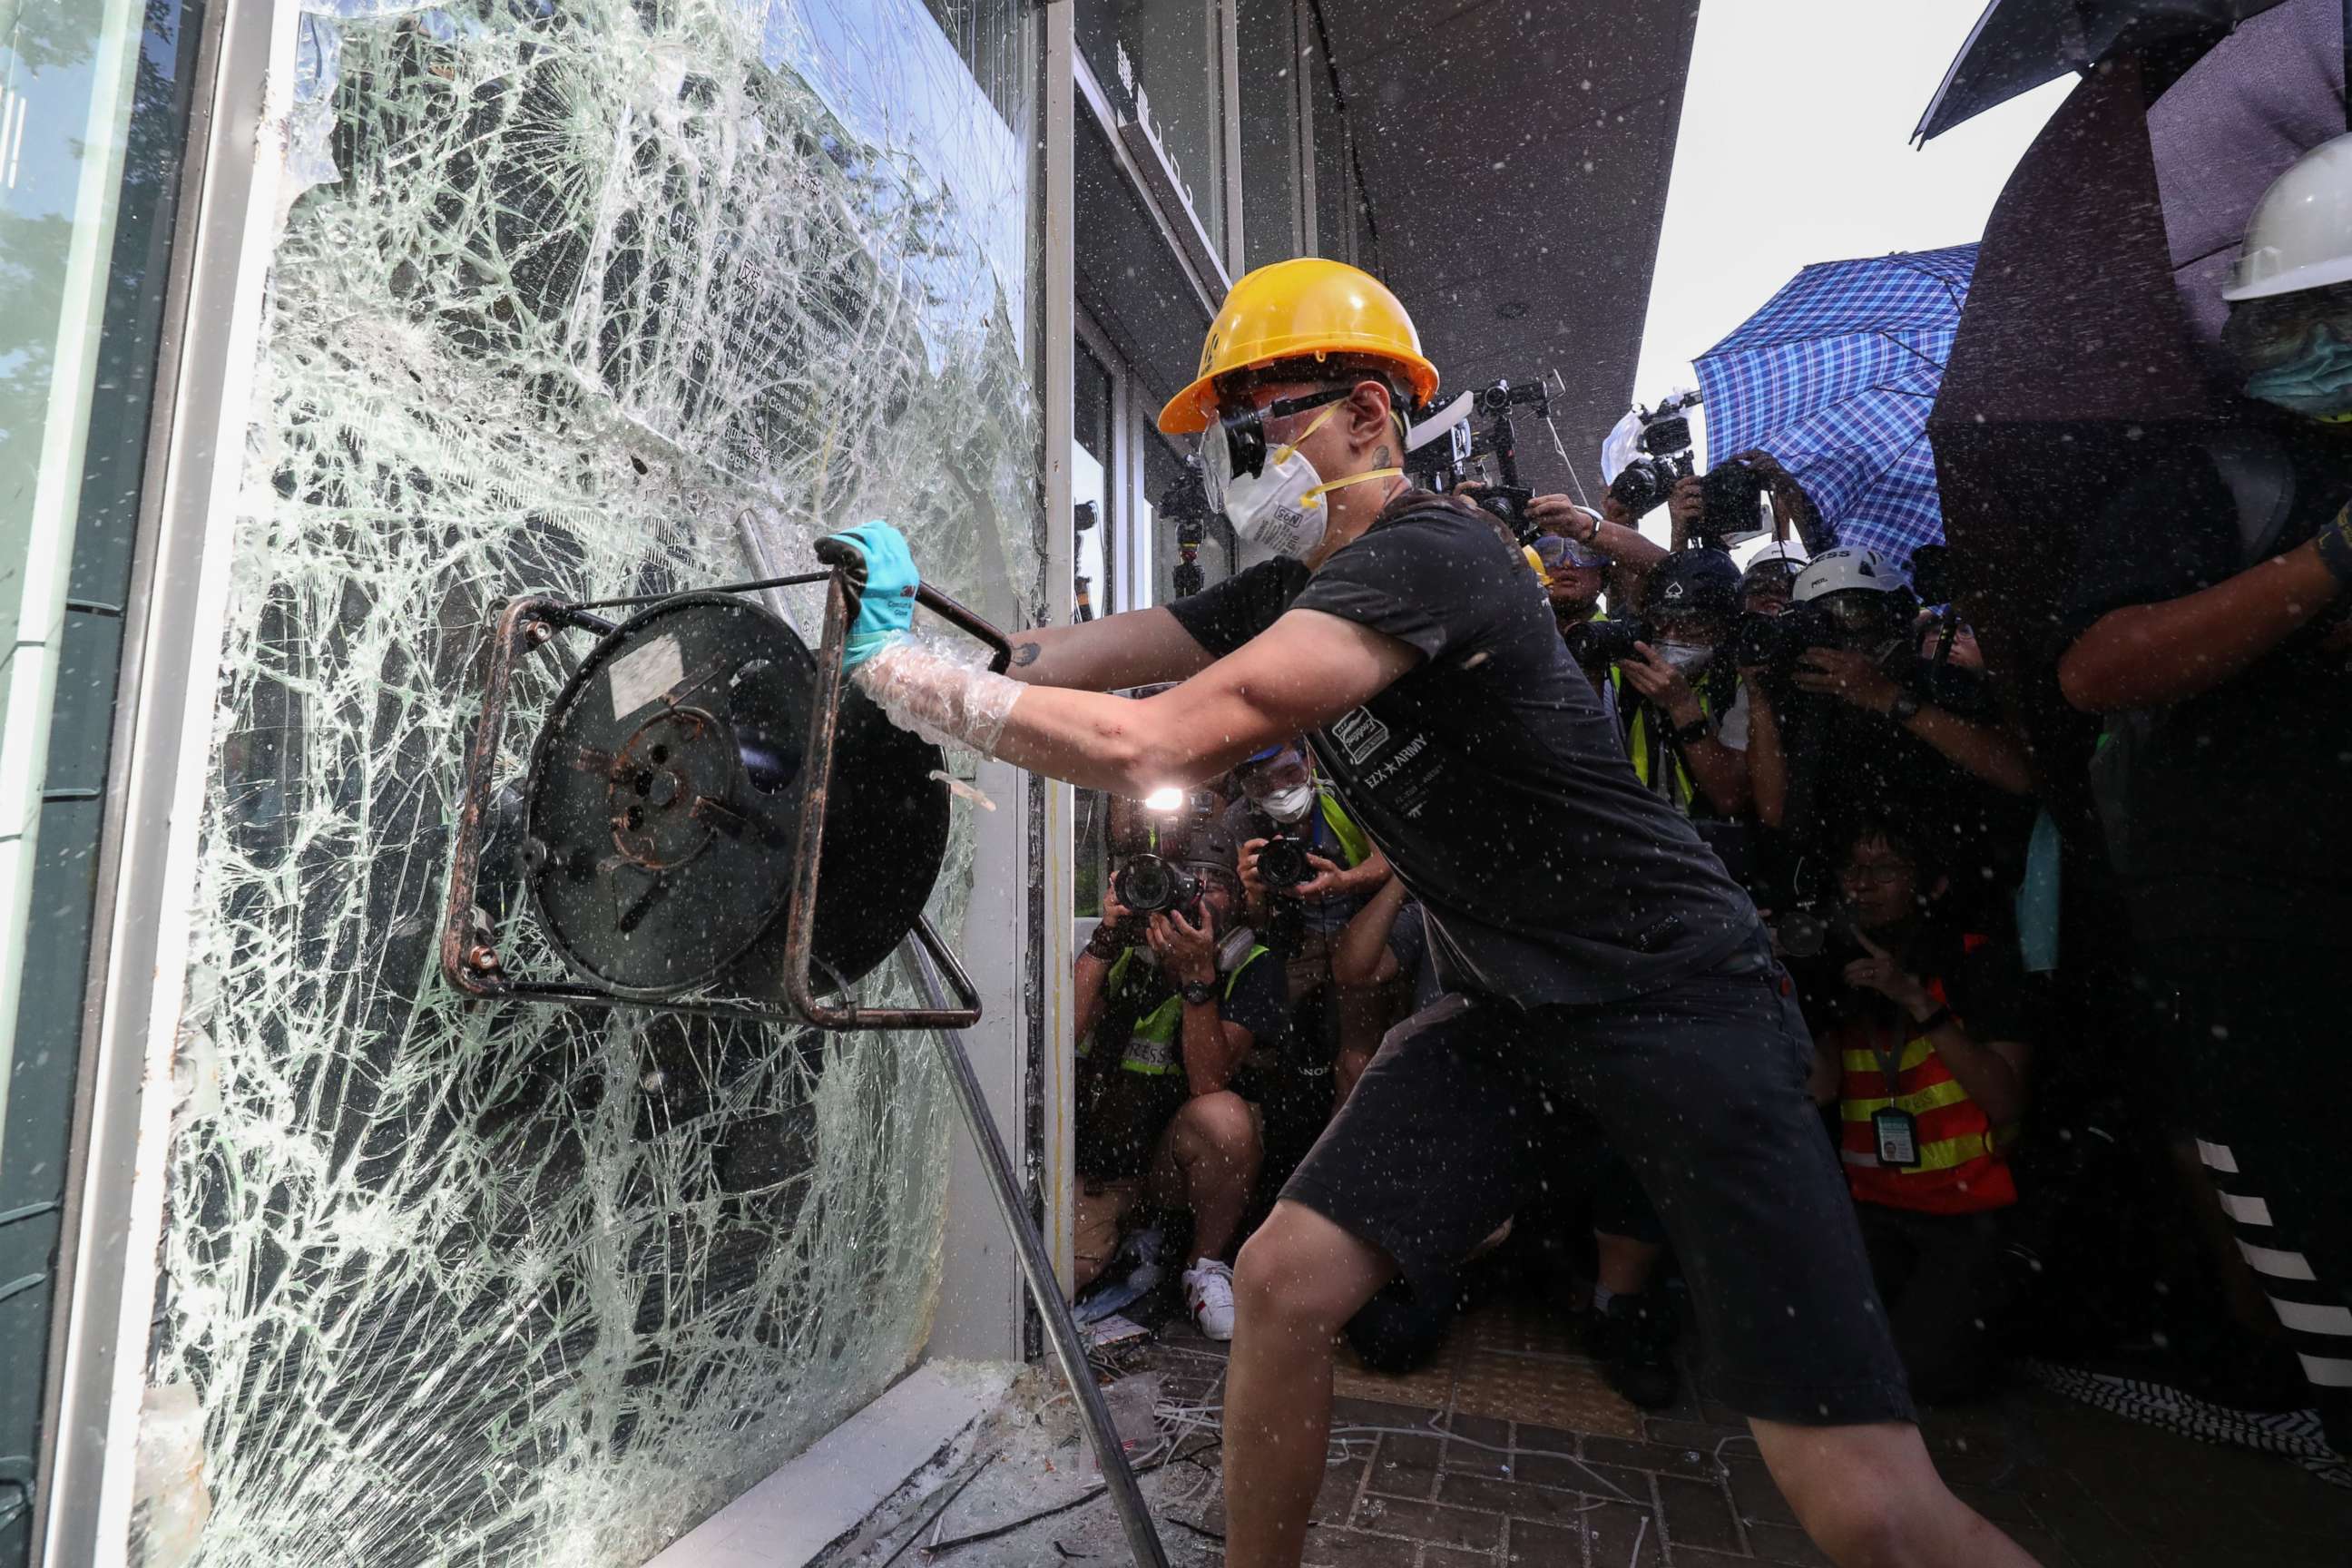 PHOTO: A protester breaks a window of the Legislative Council in Hong Kong, July 1, 2019.